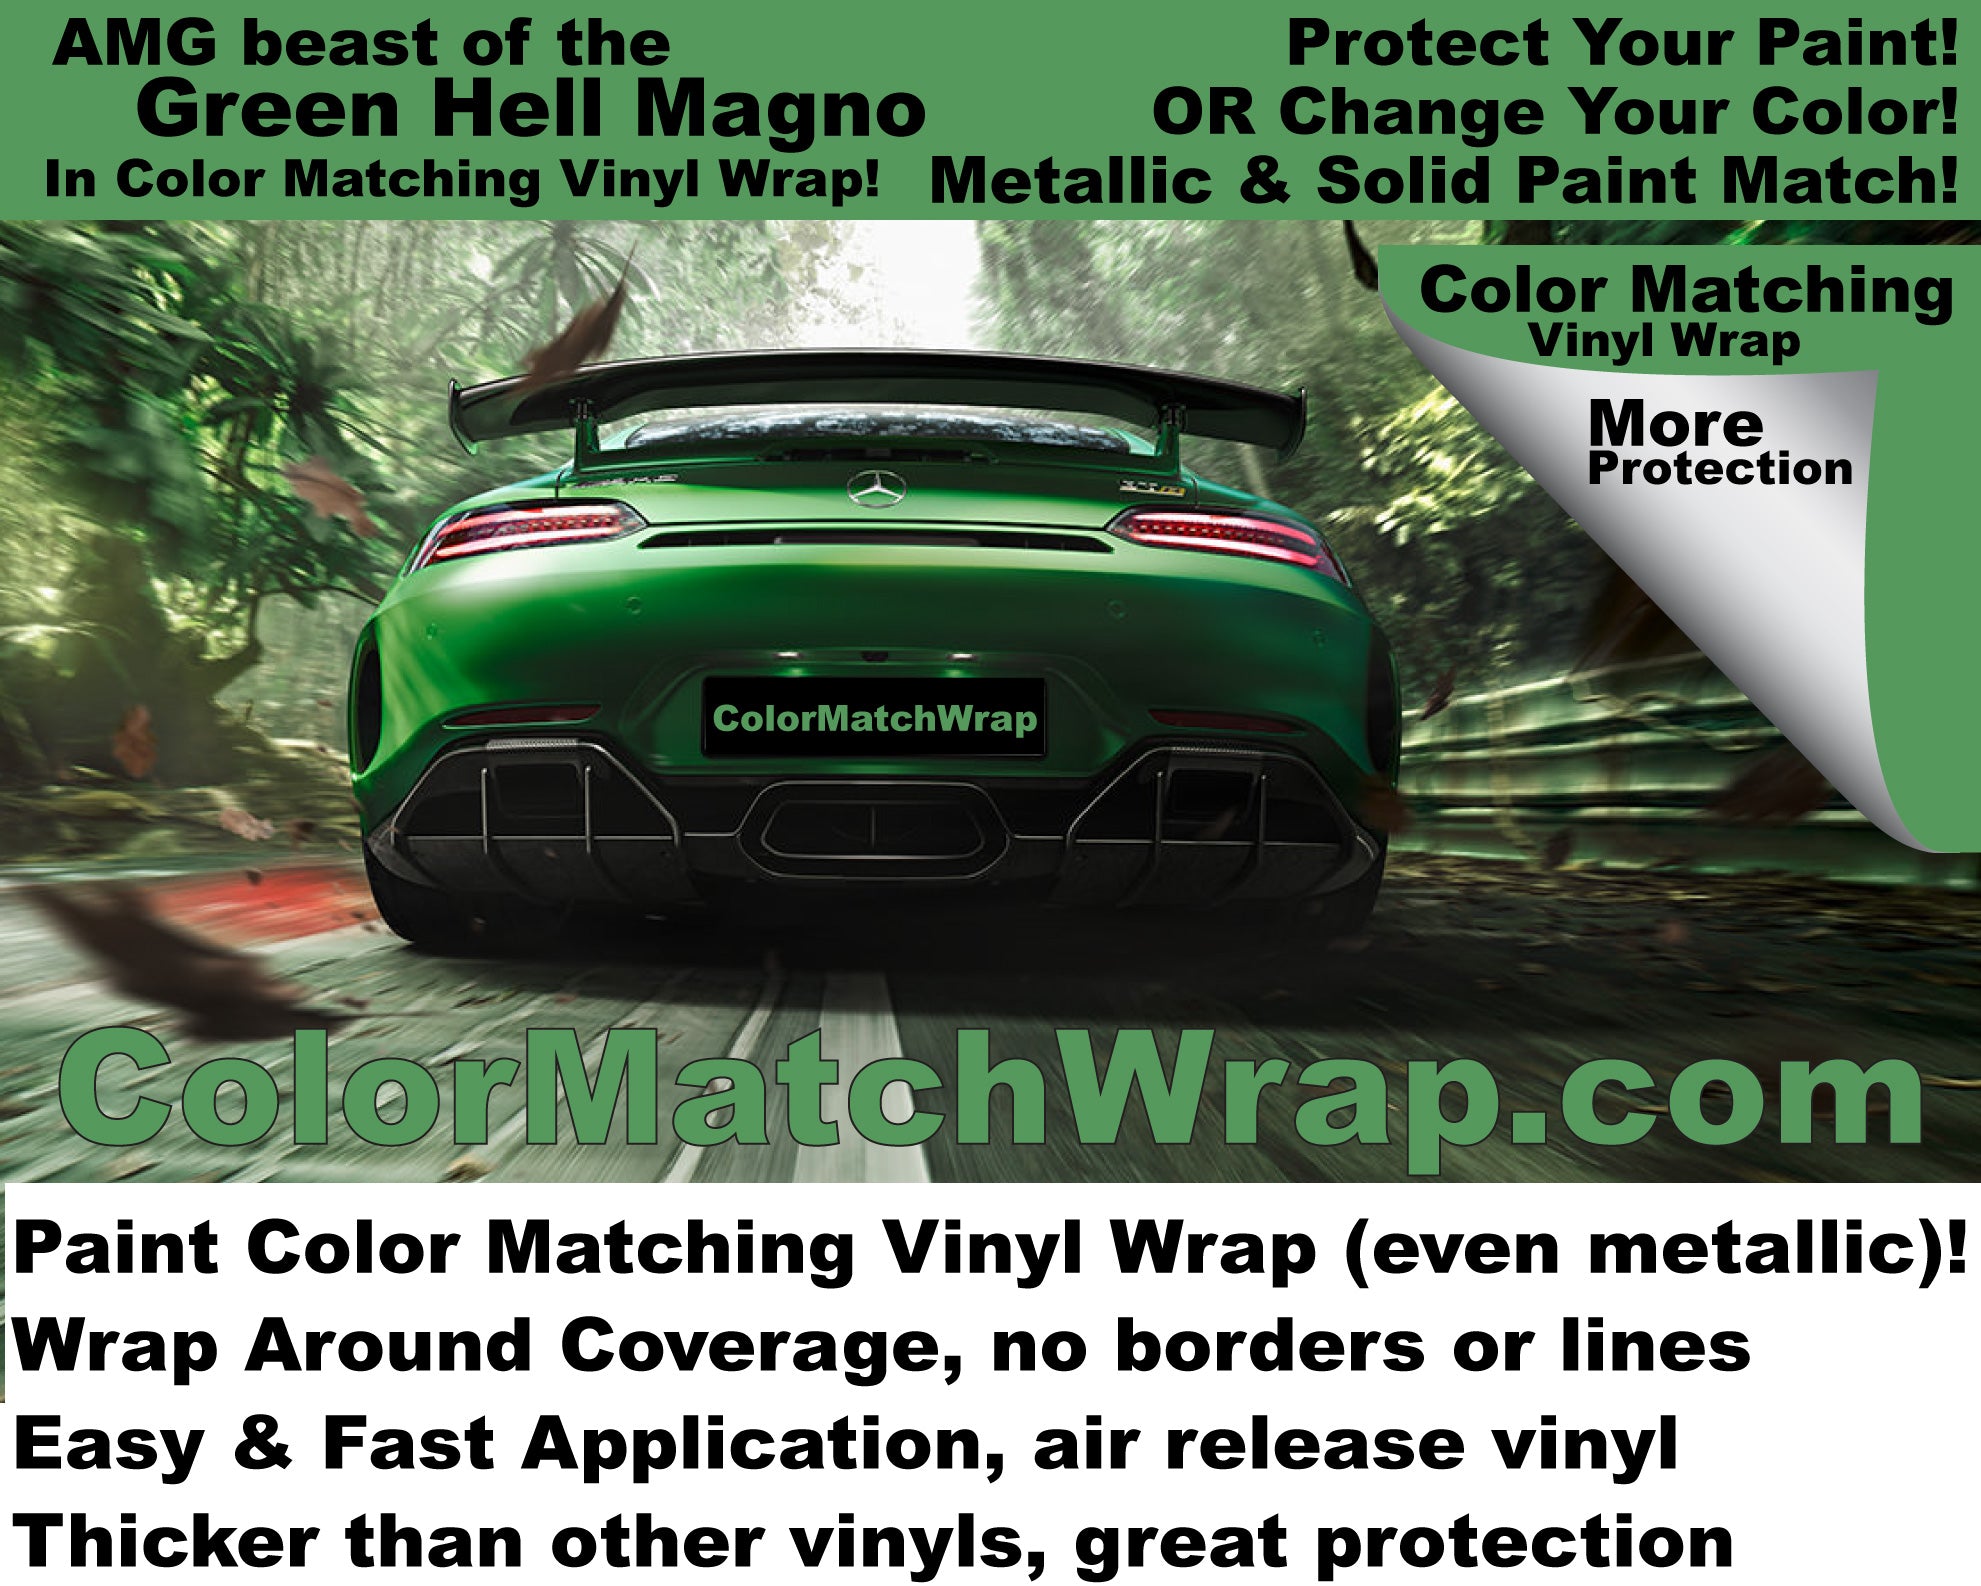 where to buy amg gt r beast of the green hell vinyl wrap